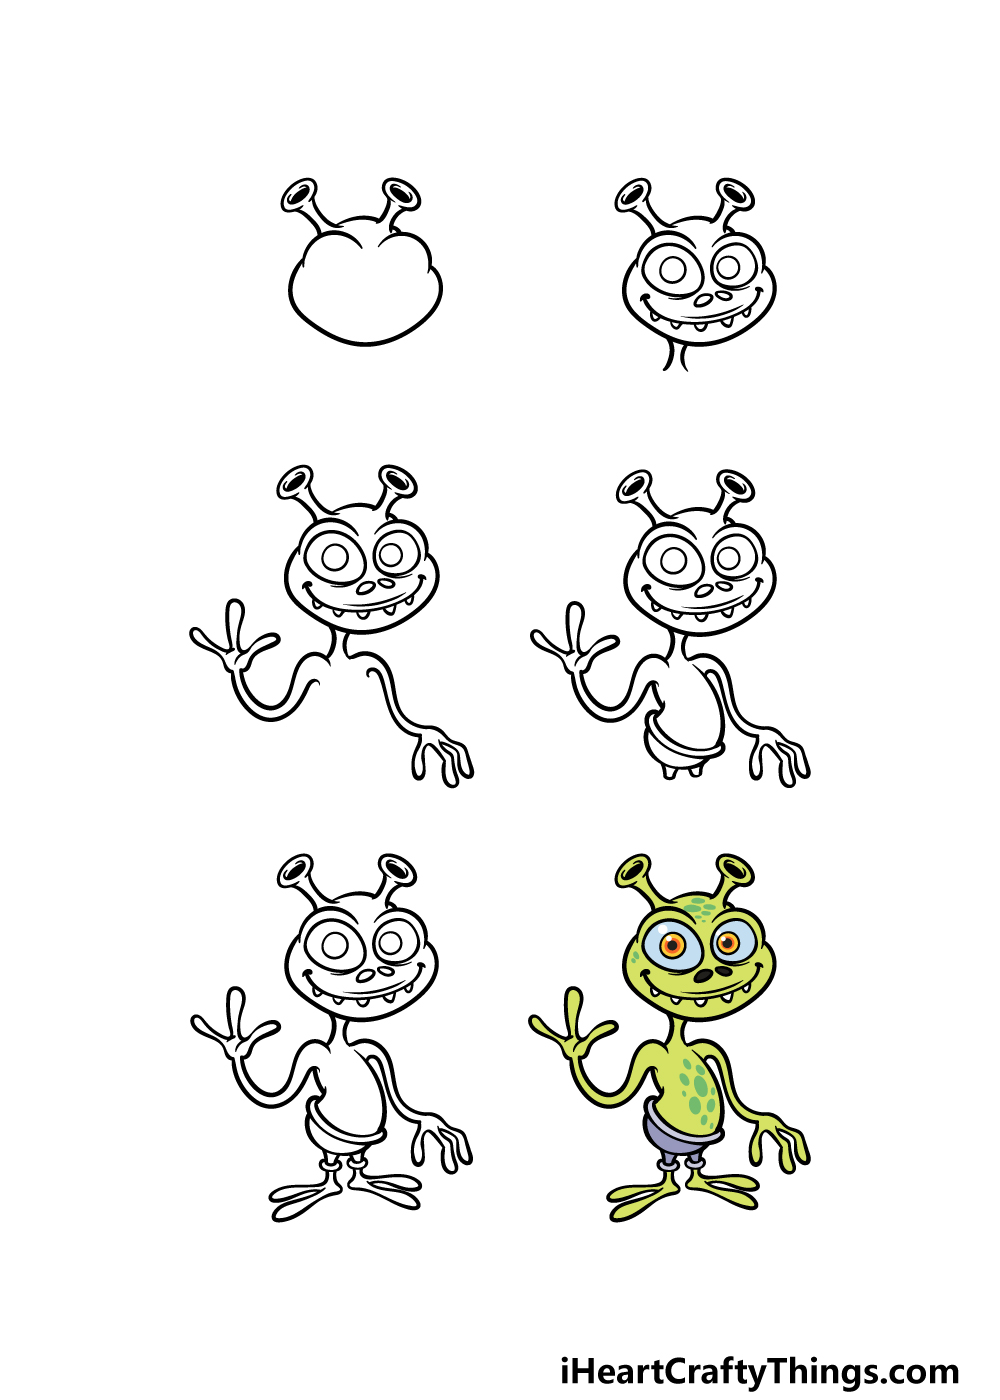 Cartoon Alien Drawing - How To Draw A Cartoon Alien Step By Step!